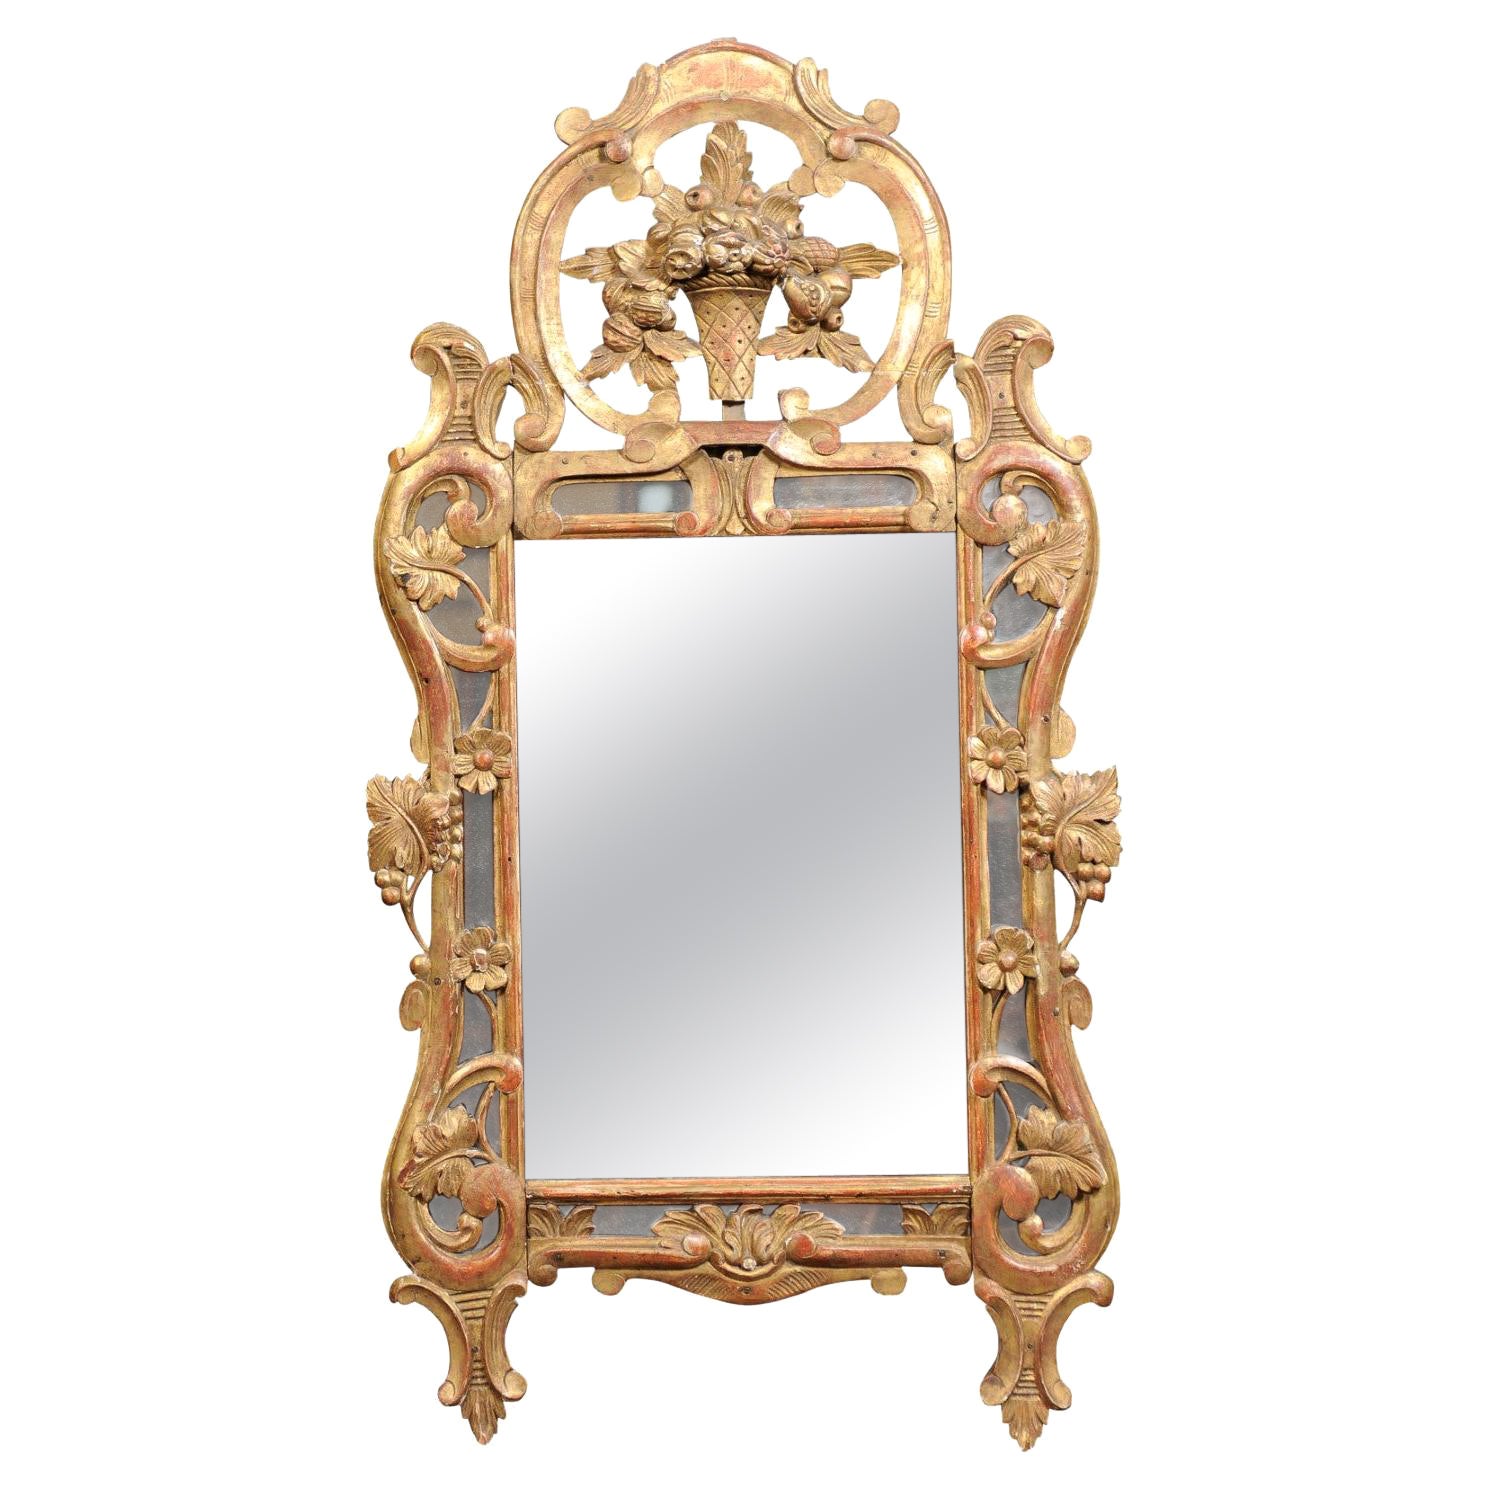 French Regence Style Giltwood Mirror with Carved Urn Crest & Foliage Detail